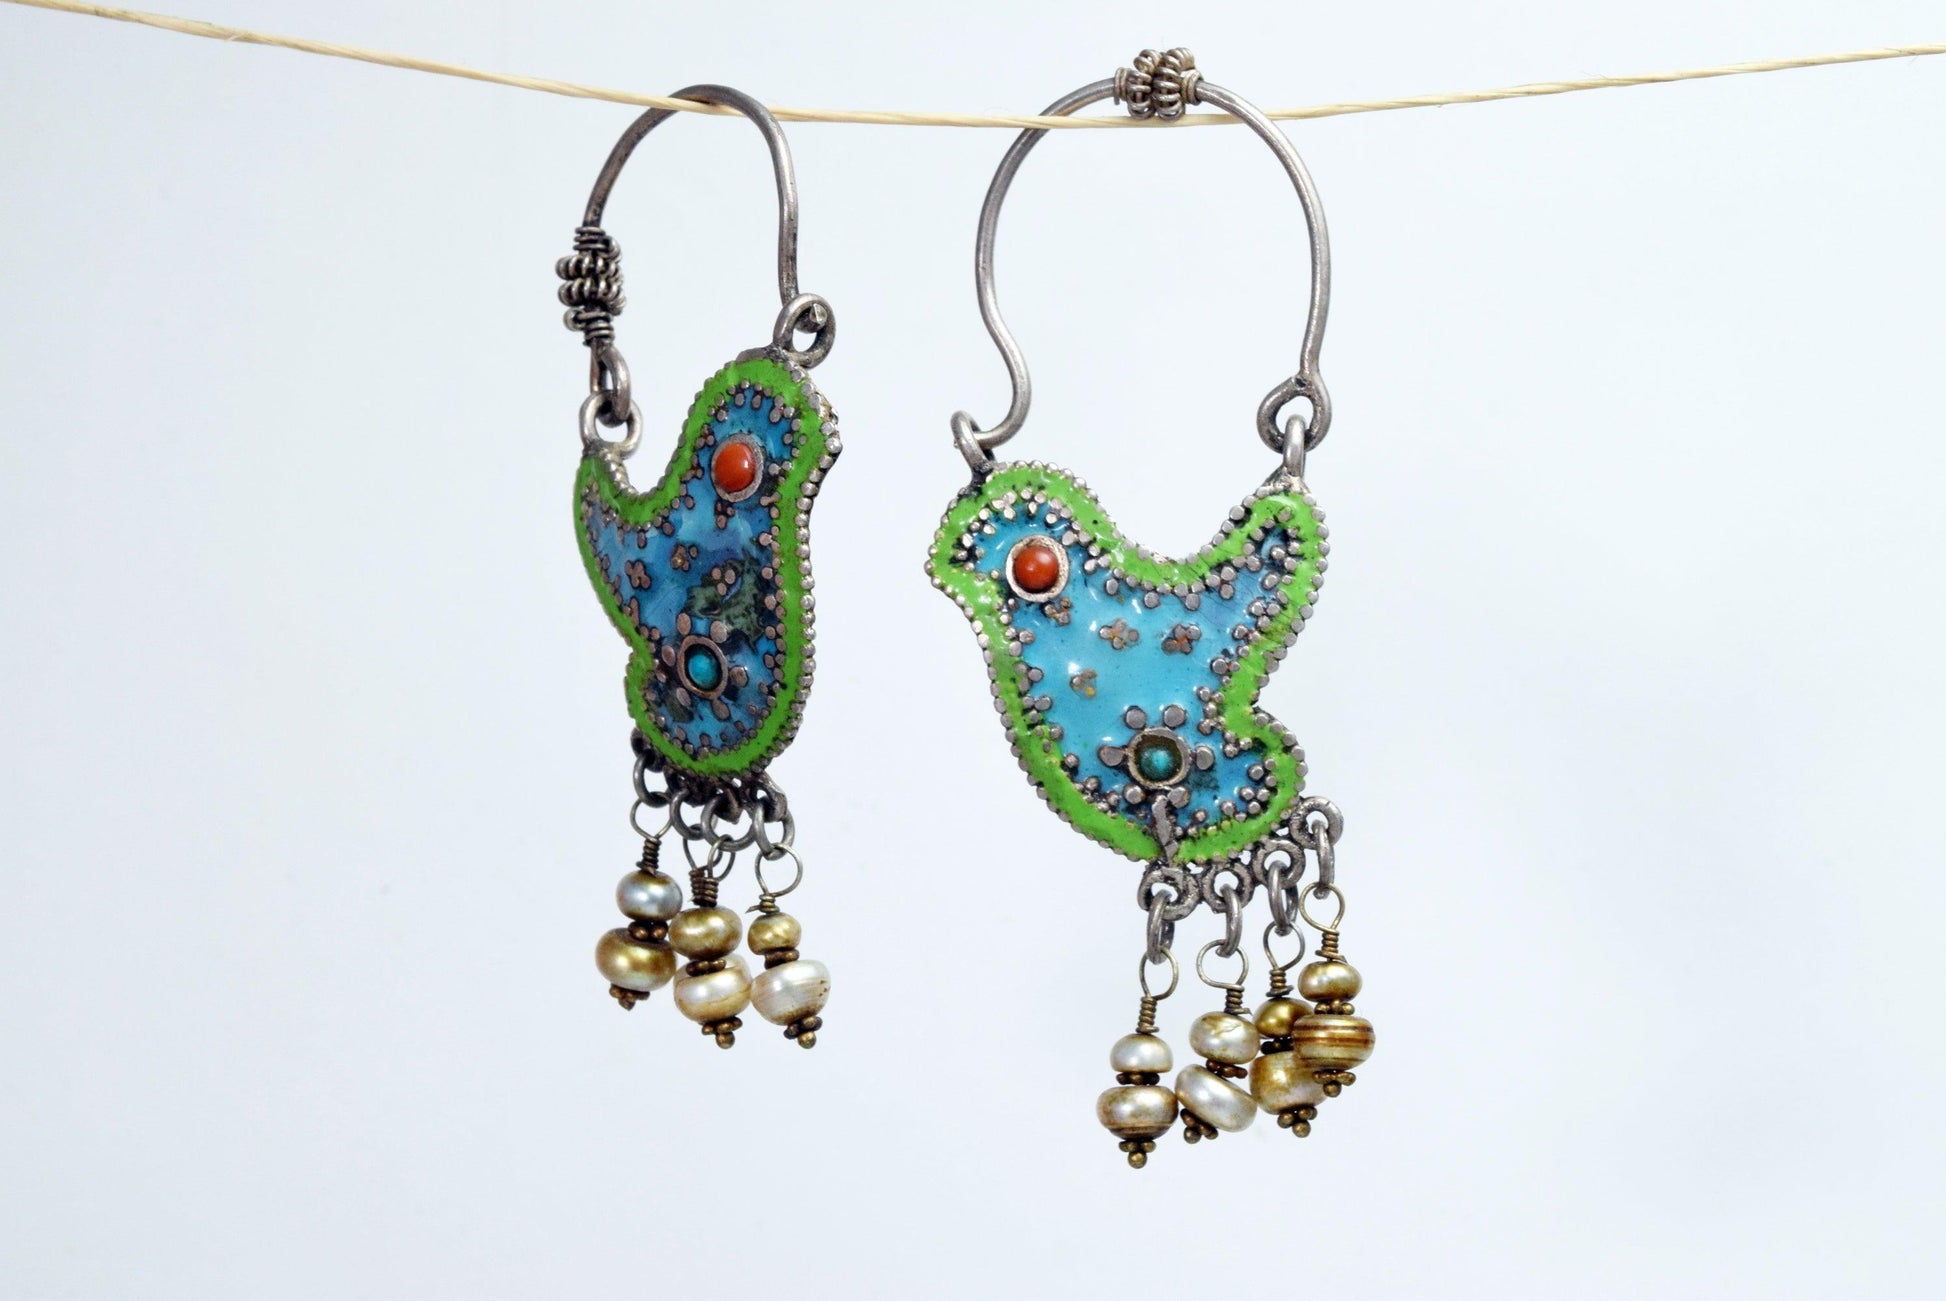 central asian jewelry